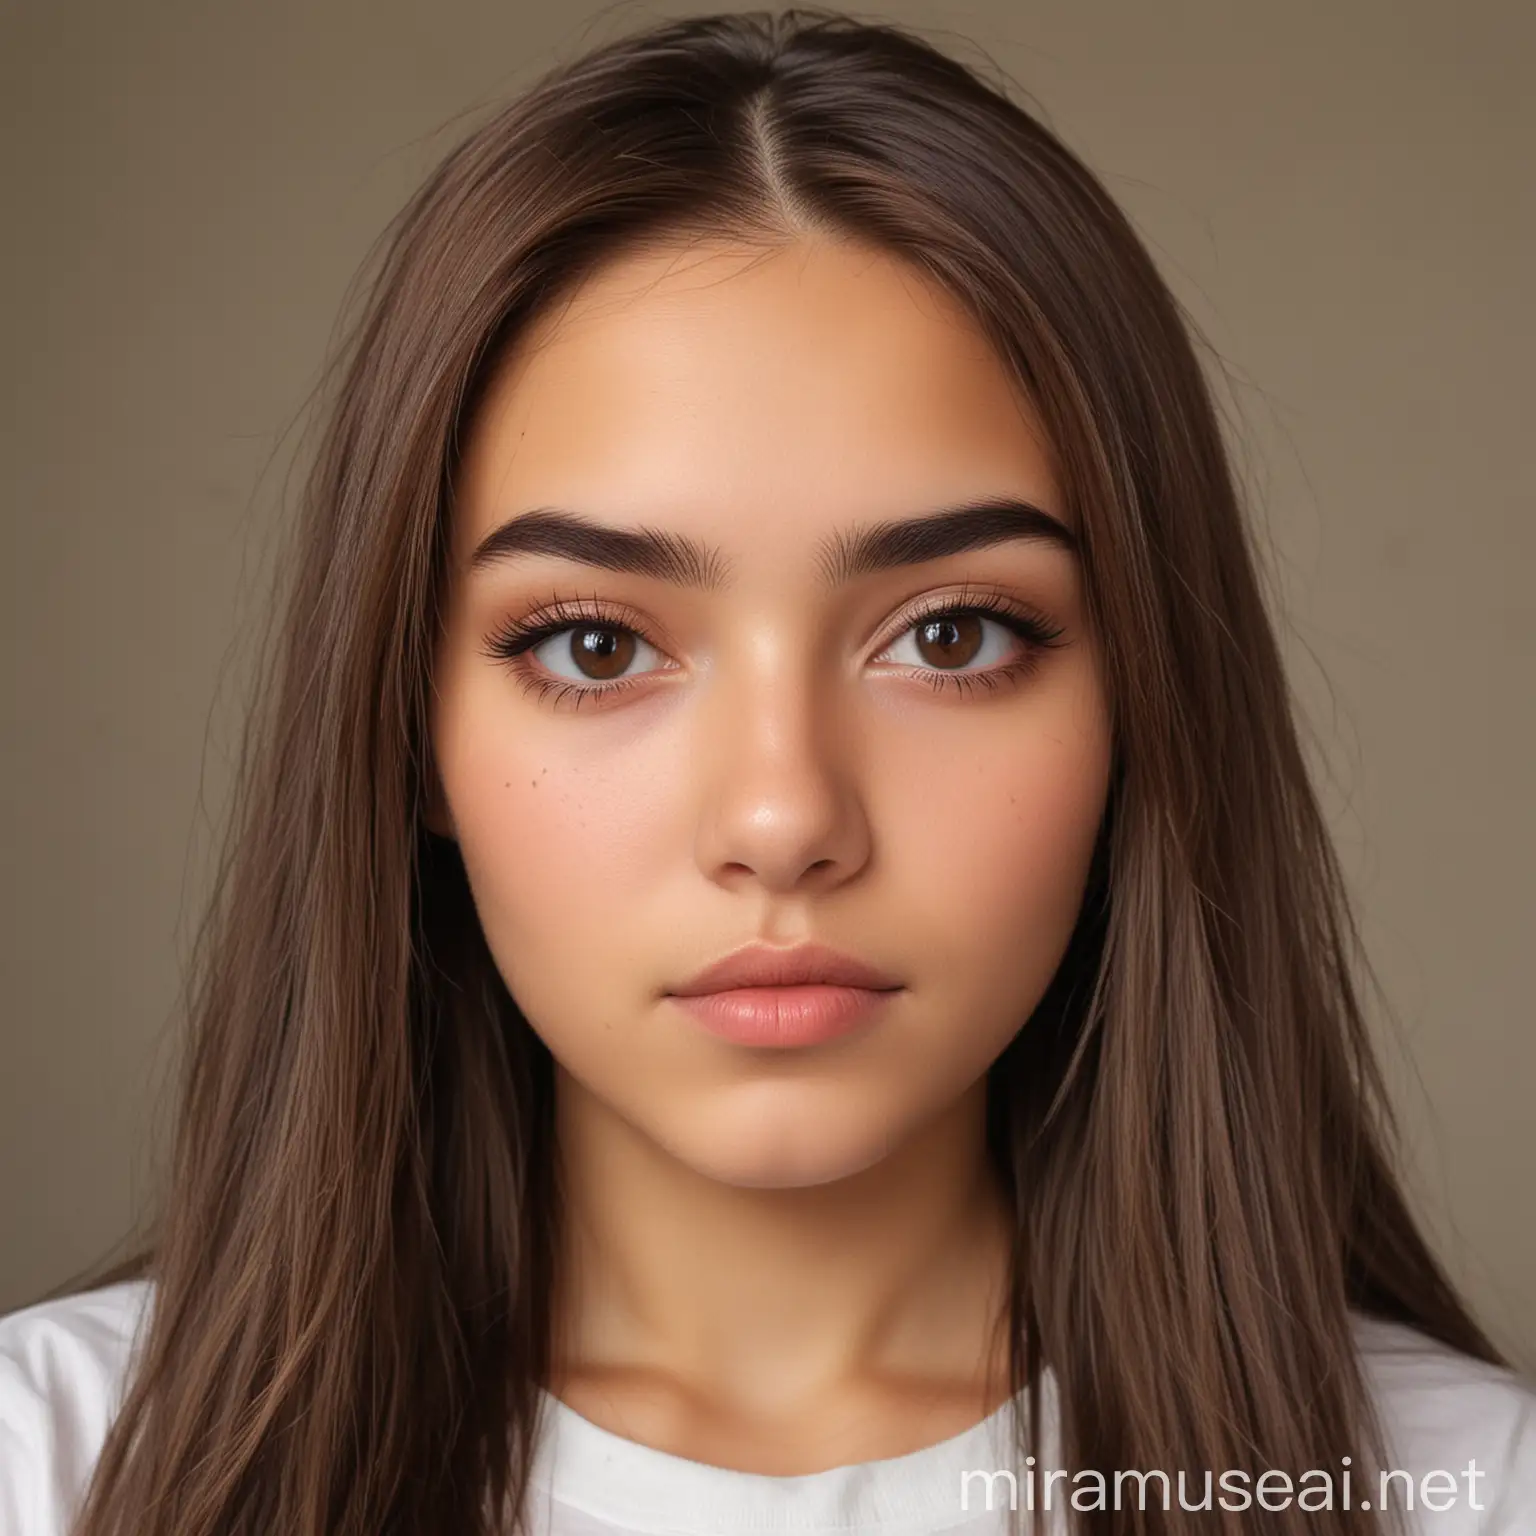 Mexican Girl with Medium Brown Hair and Straight Eyebrows